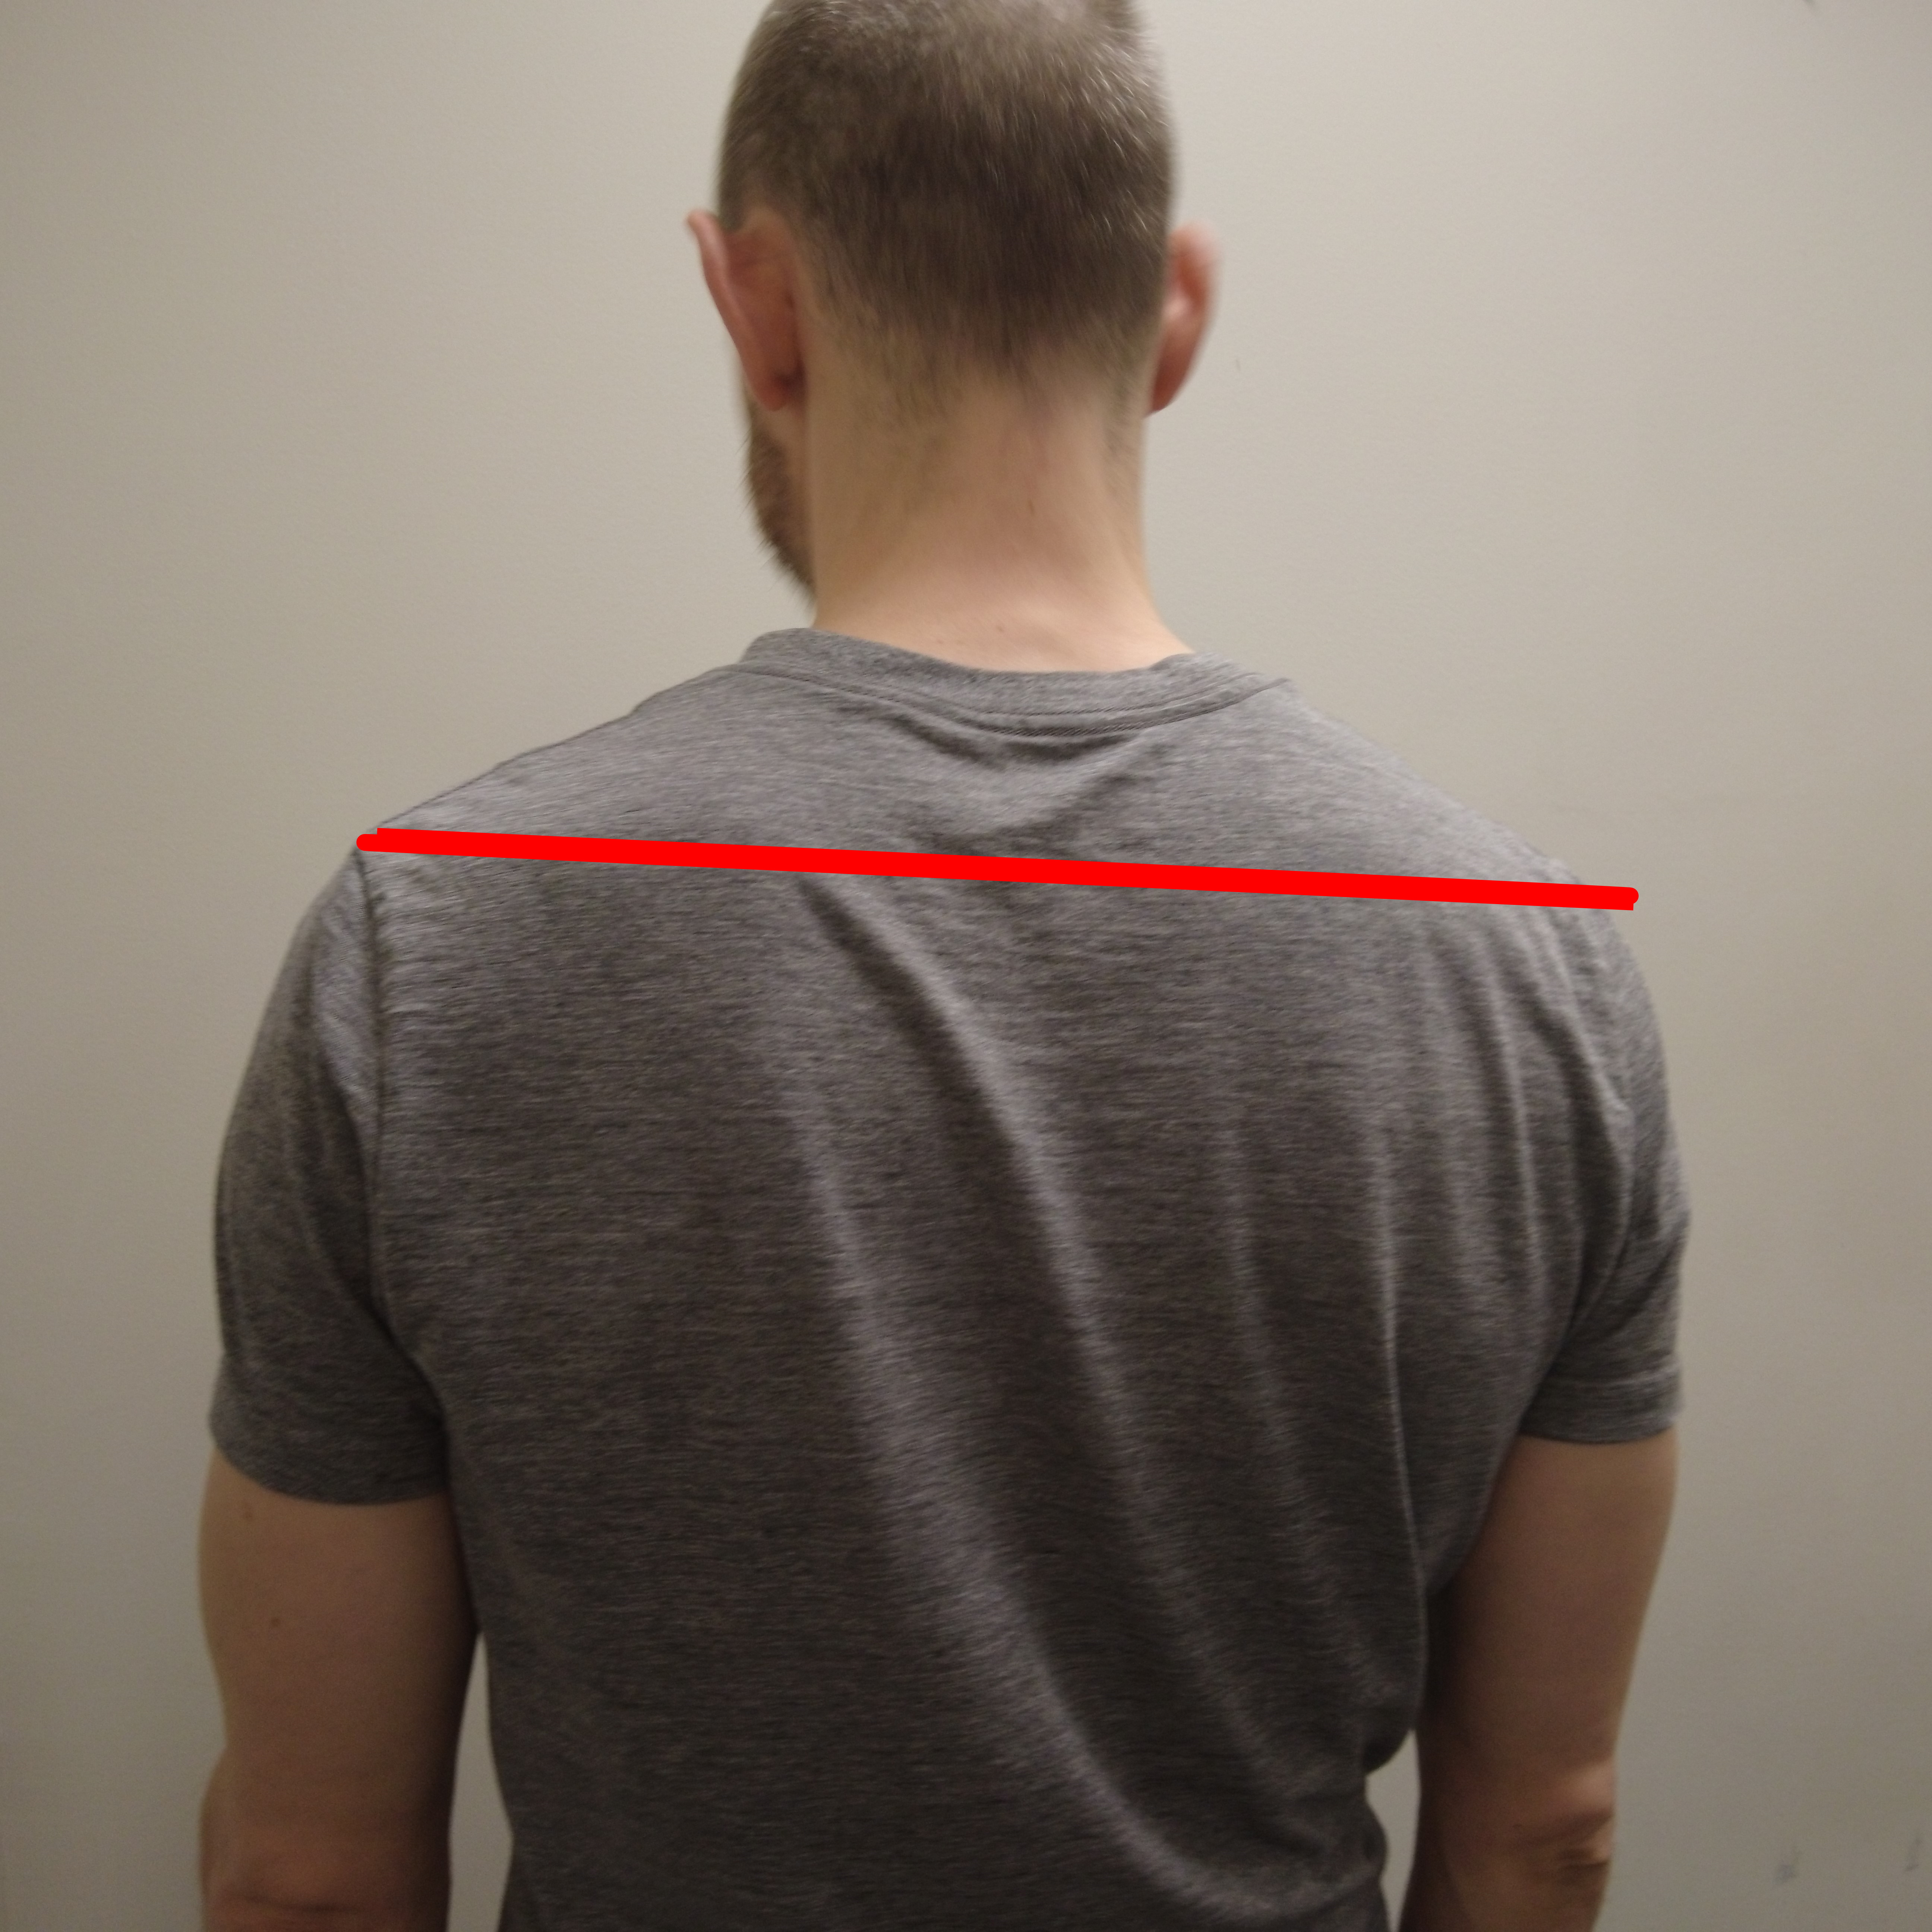 Man from behind with right shoulder lower than left